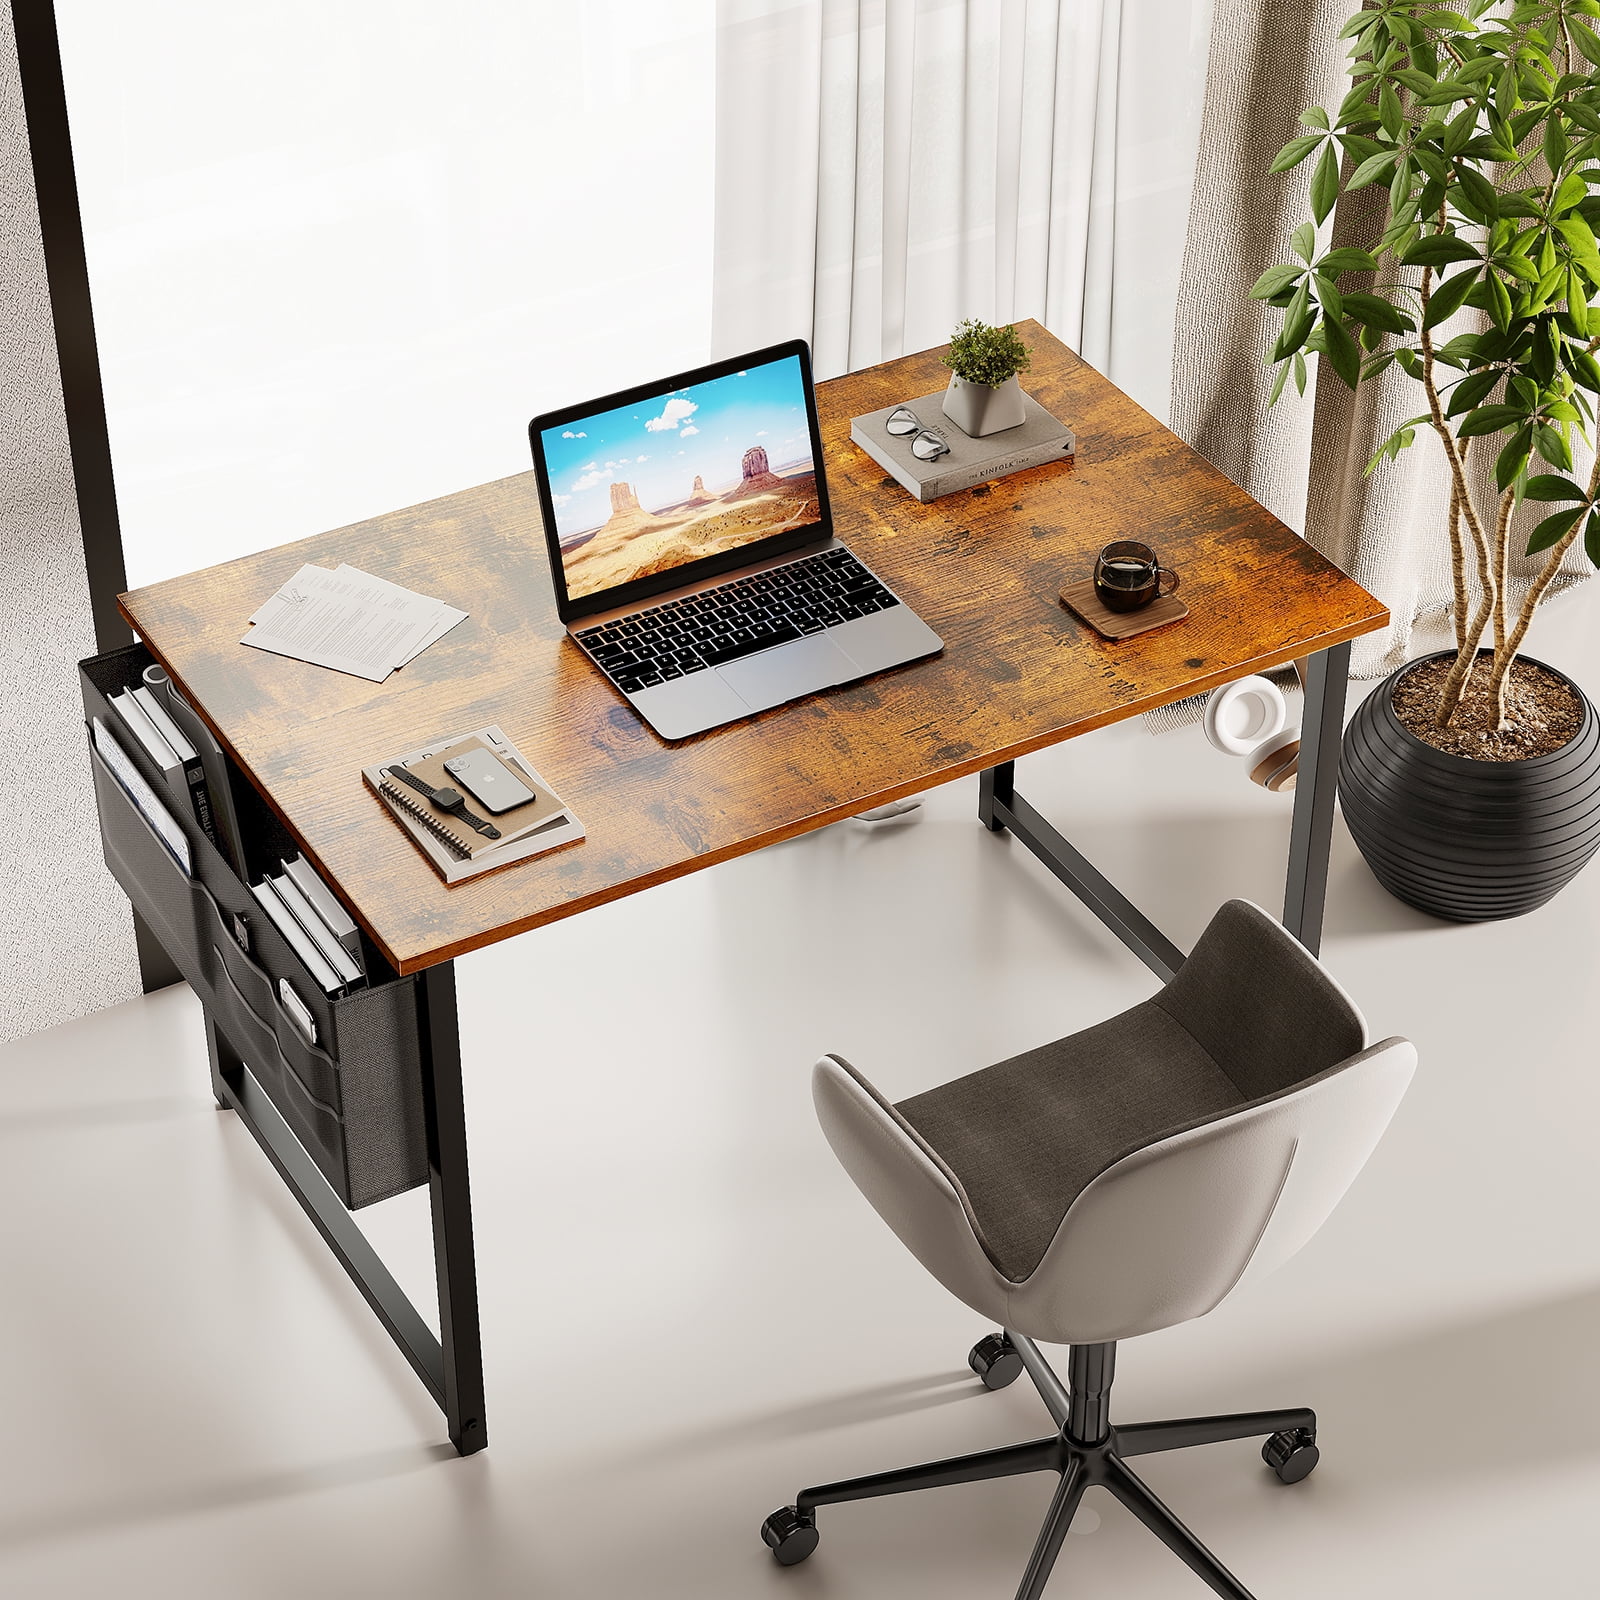 Modern Writing Desk - 40 Inch Office Table with Storage and Hooks, Wood  Computer Desk for Bedroom, Small Home Office, PC Table Desk, Rust Brown